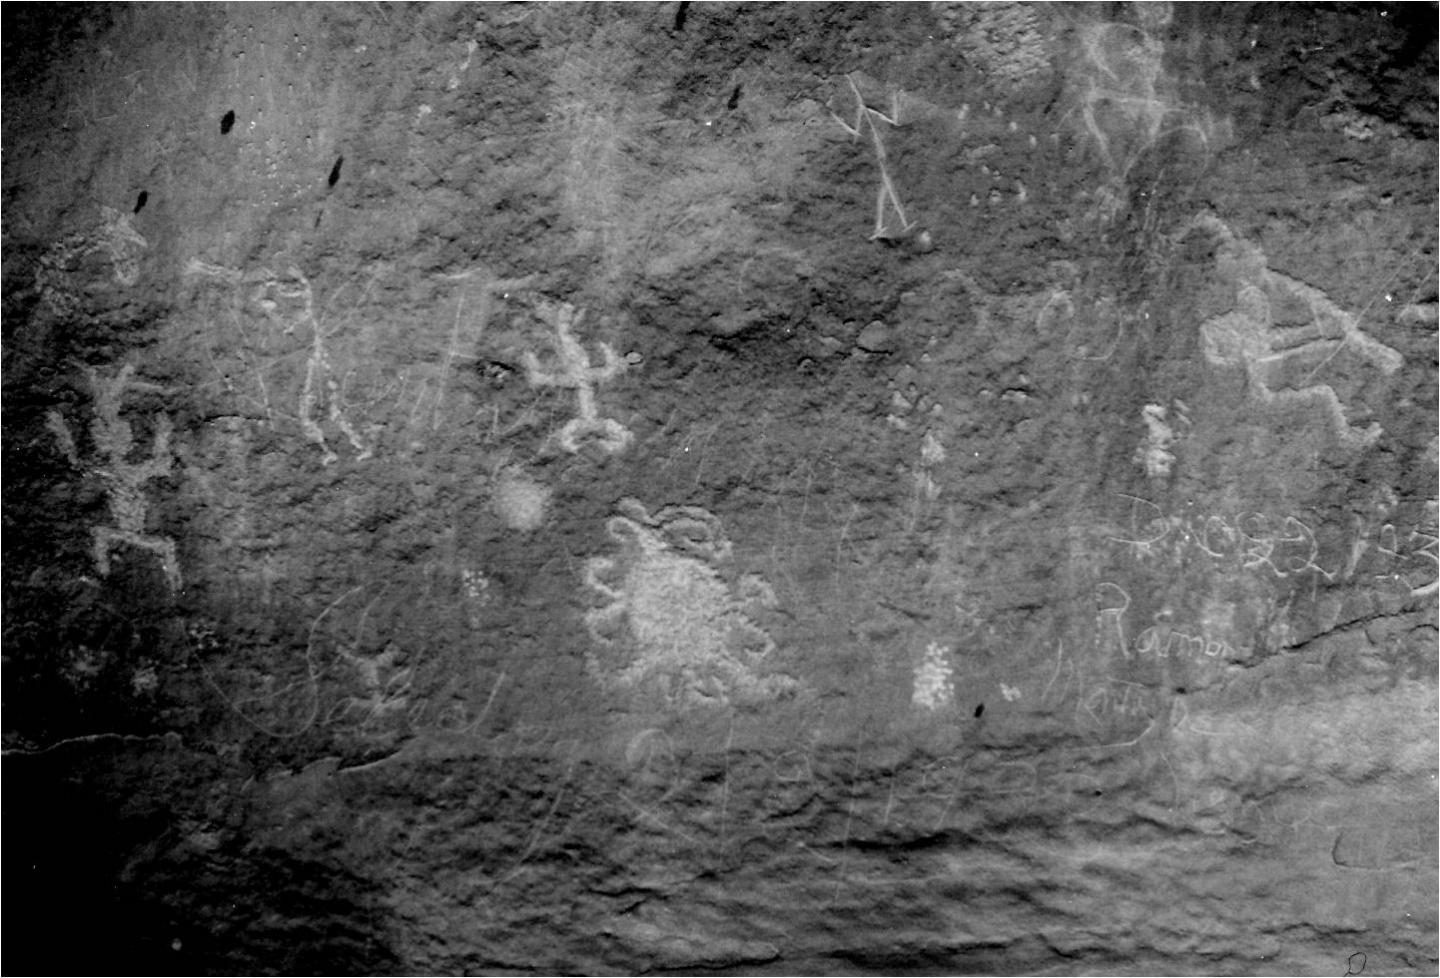 Possible Eclipse Petroglyph in Chaco Canyon